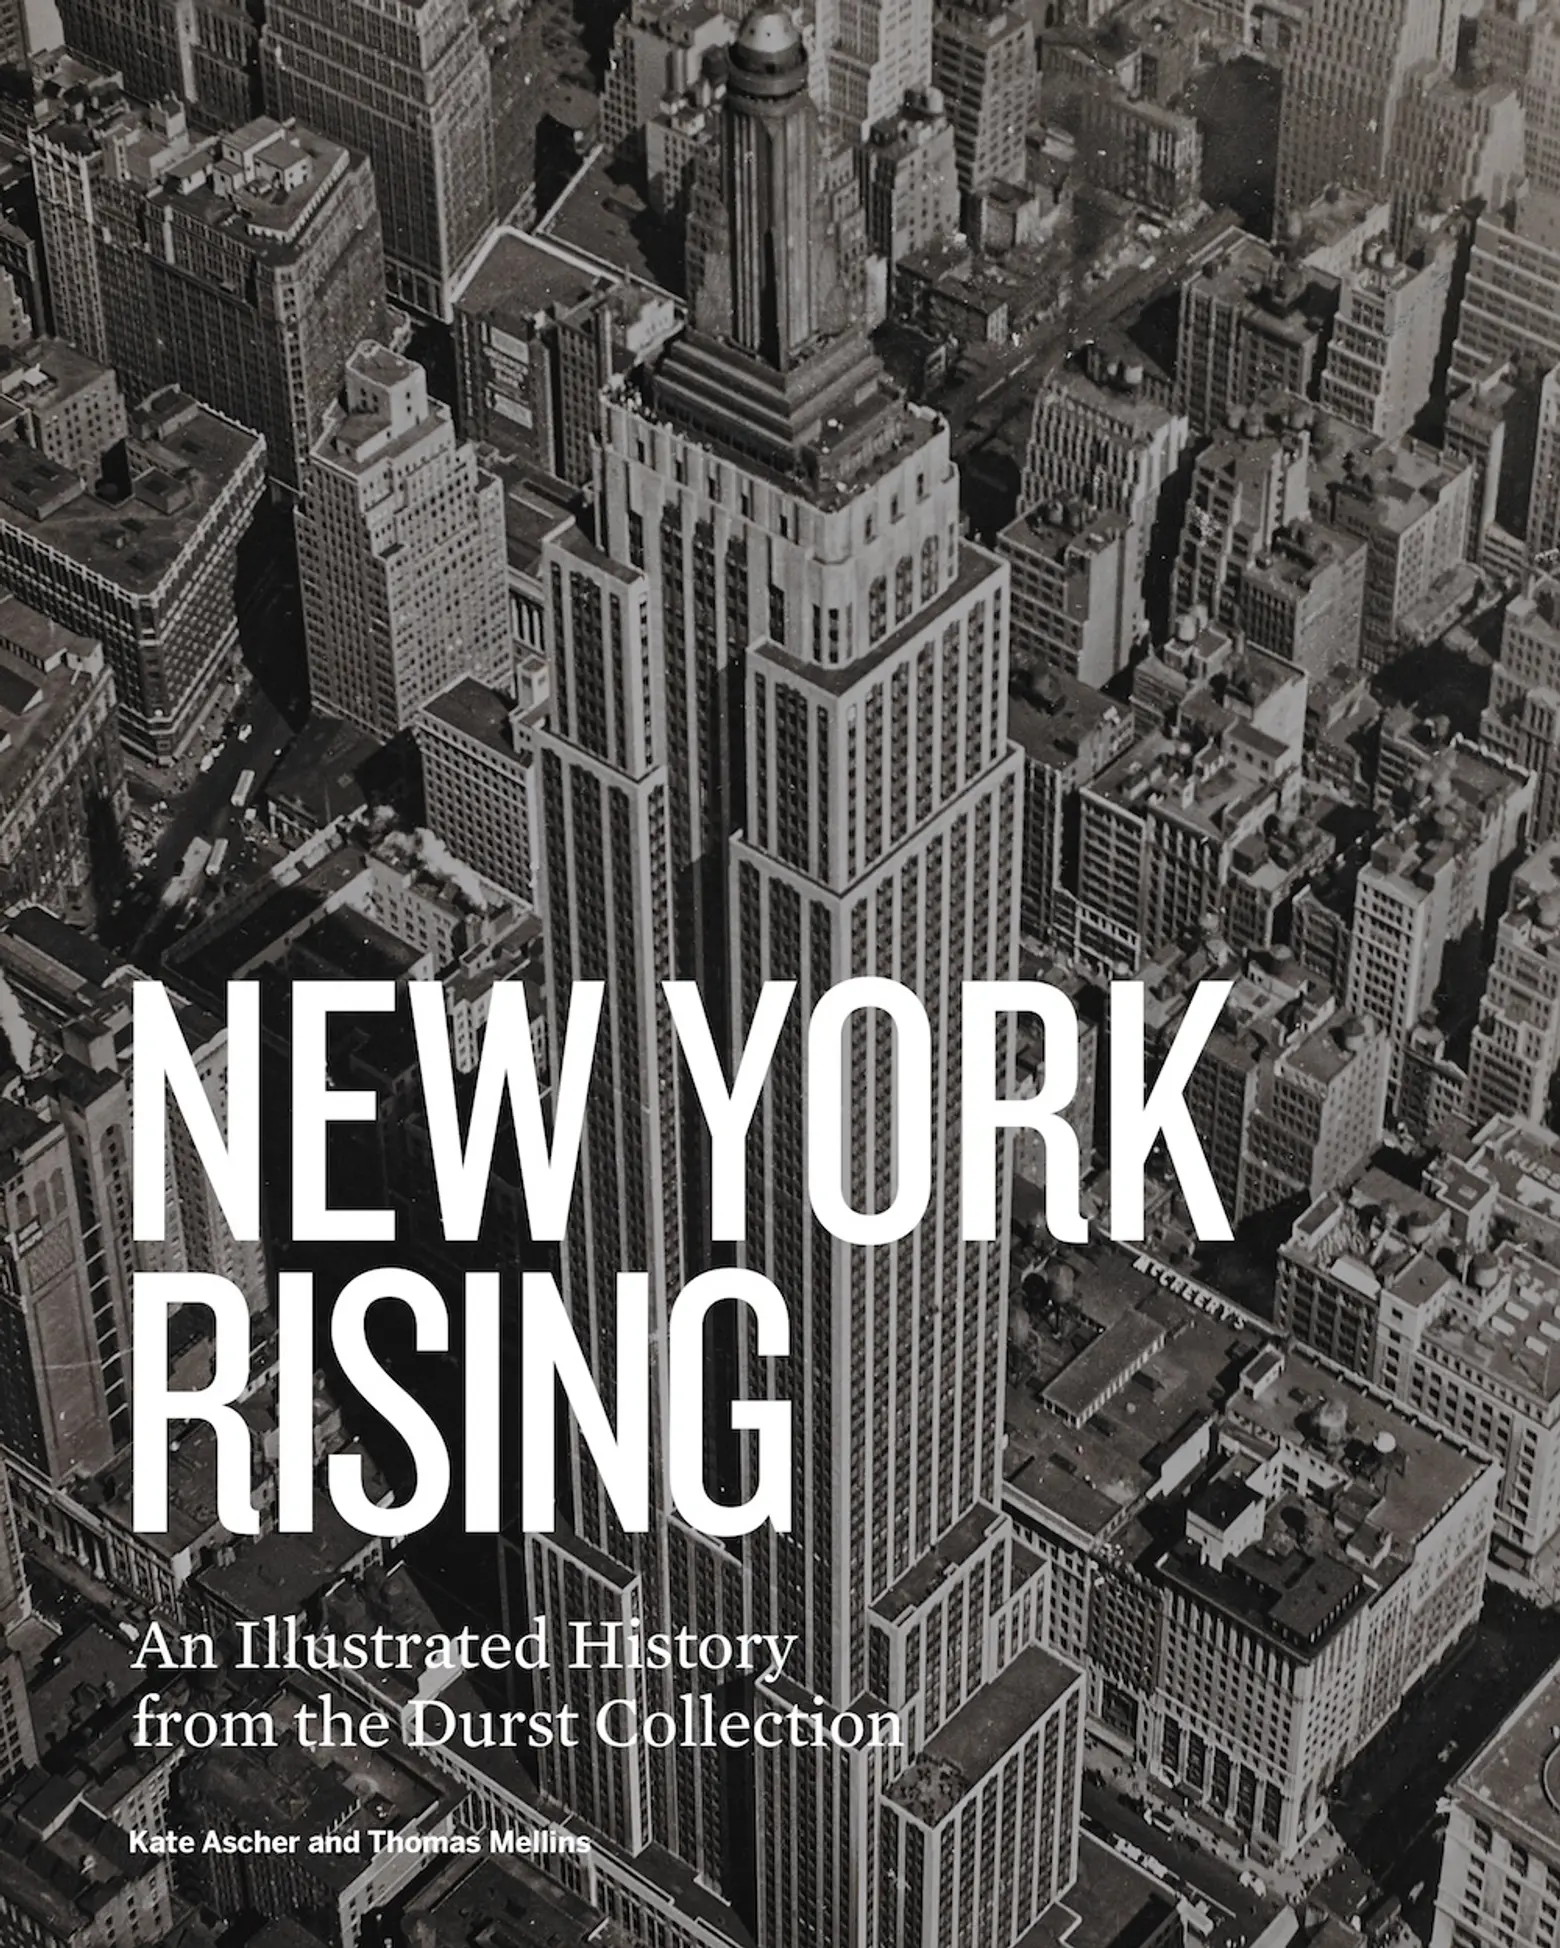 new york rising, durst collection, avery collection, old york library, seymore durst